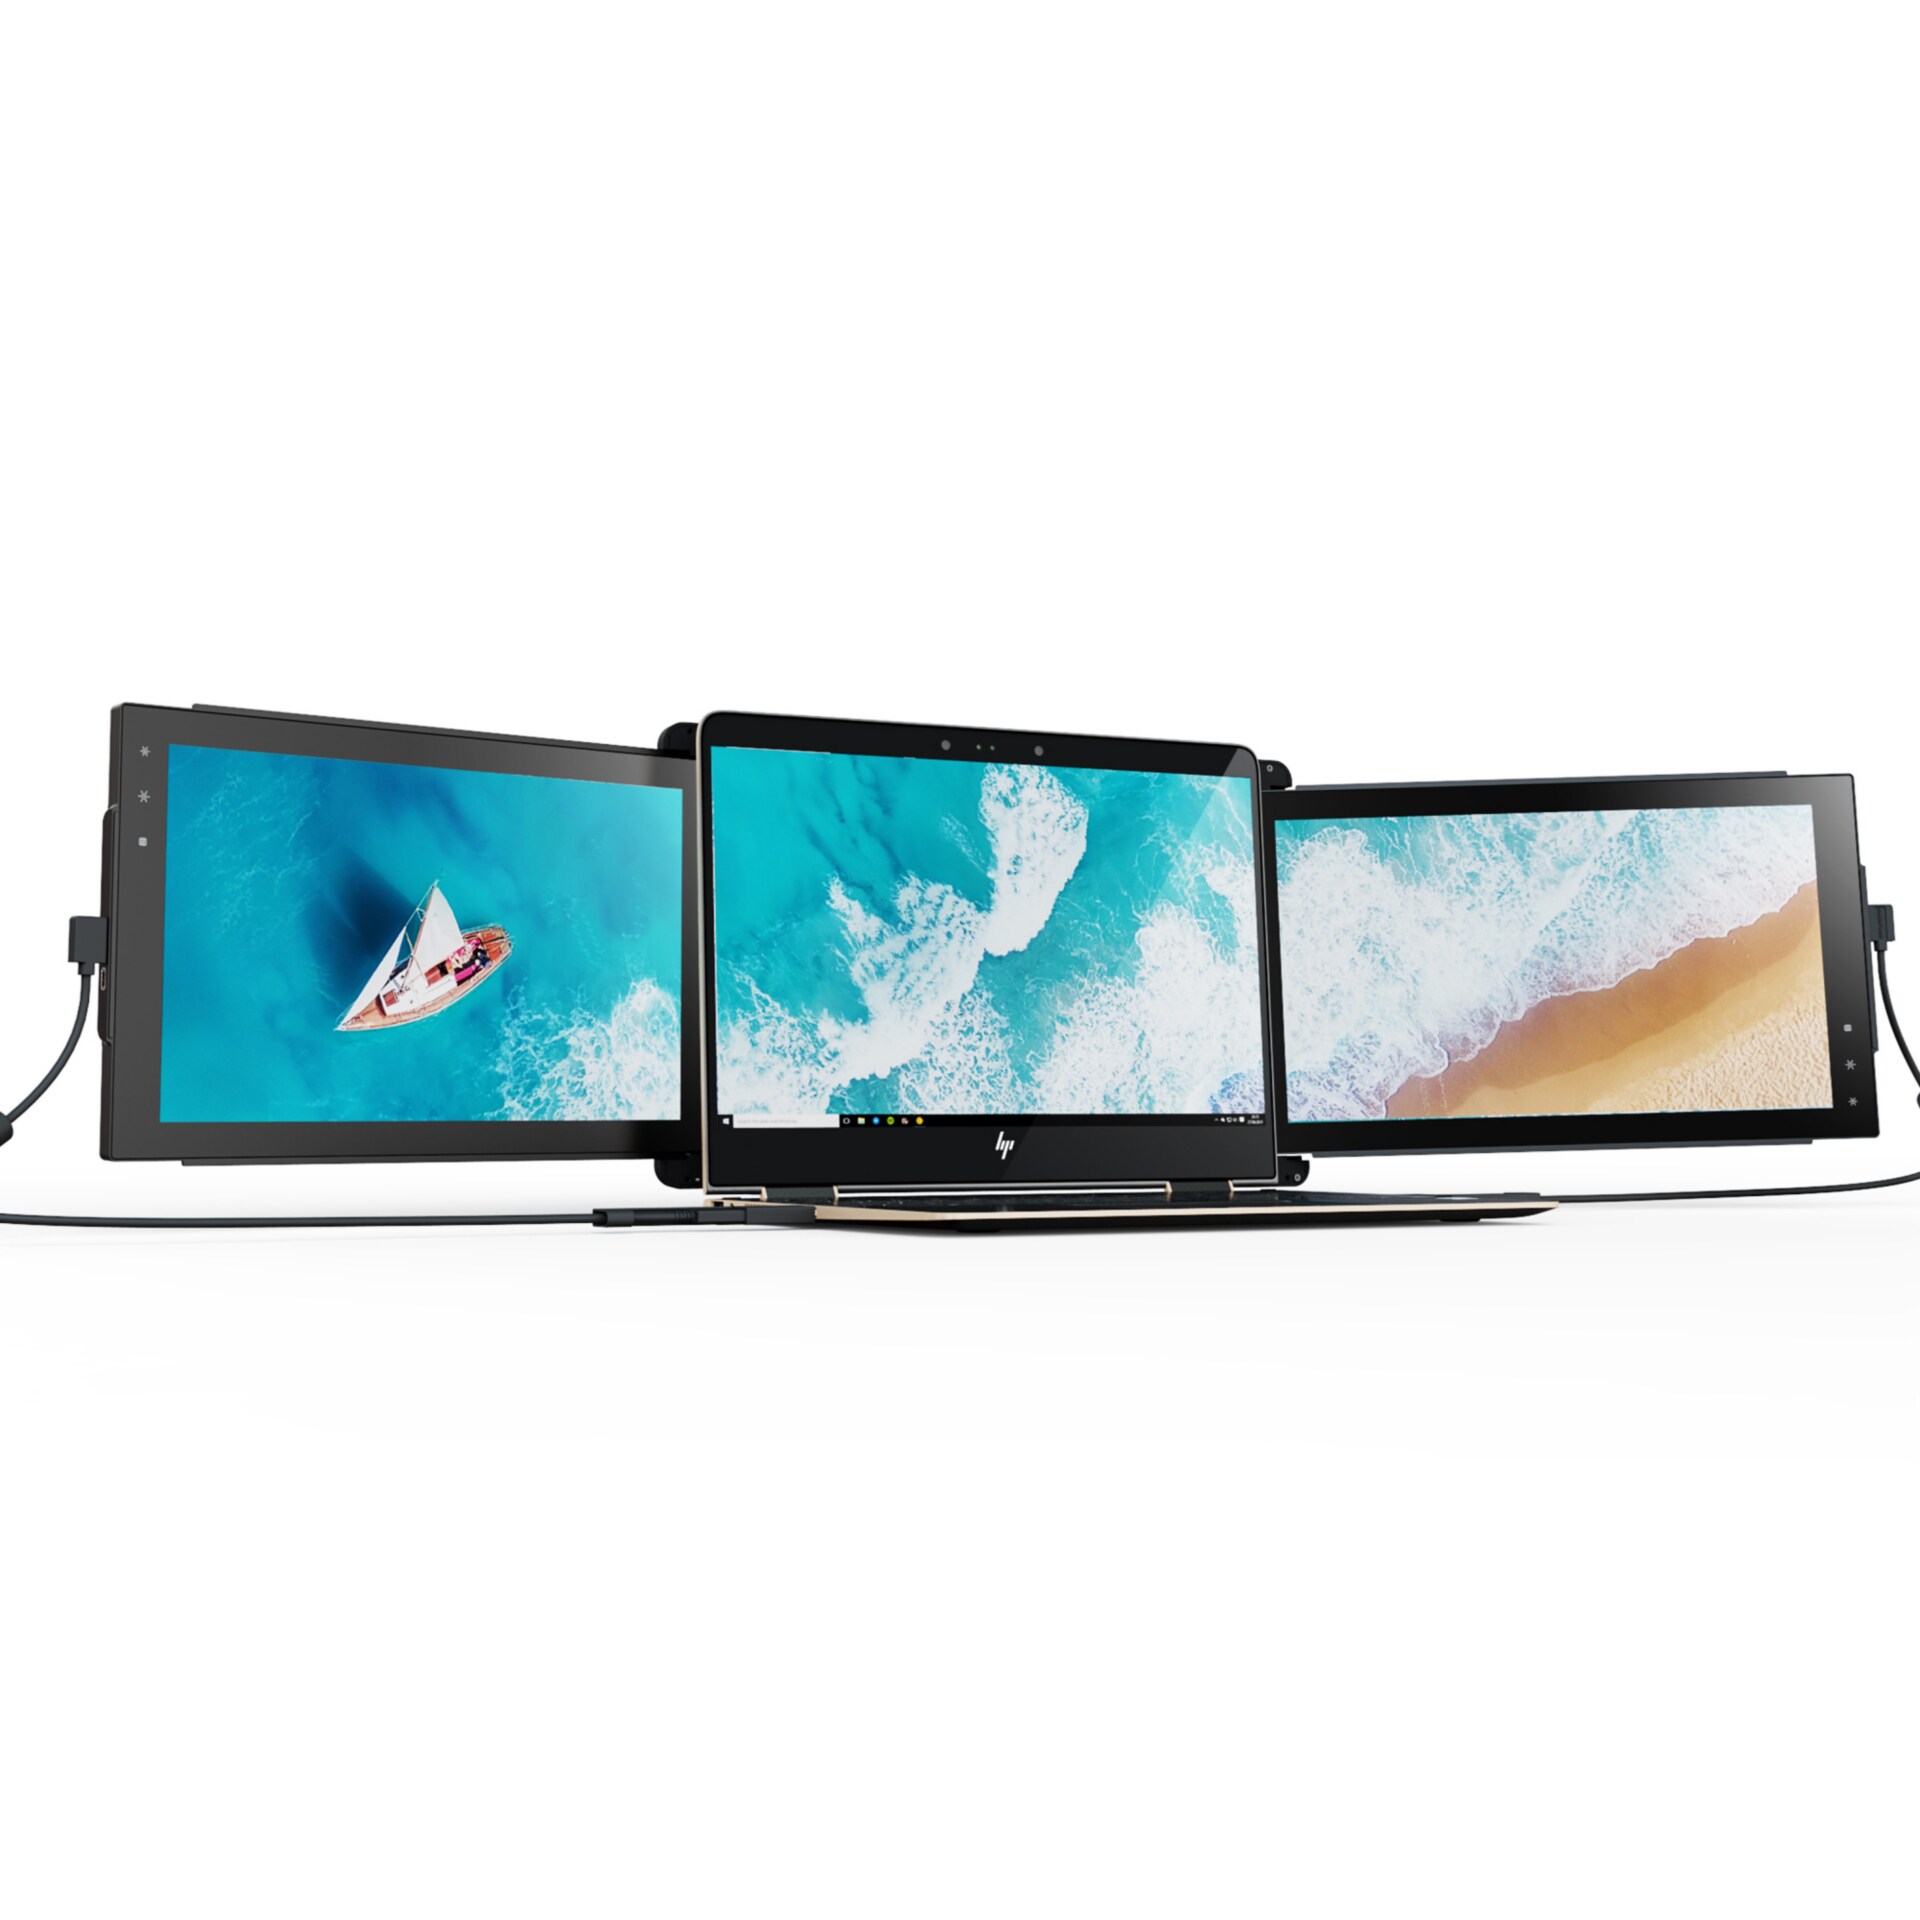 Mobile Pixels TRIO Max 14" Monitor - 2-Pack